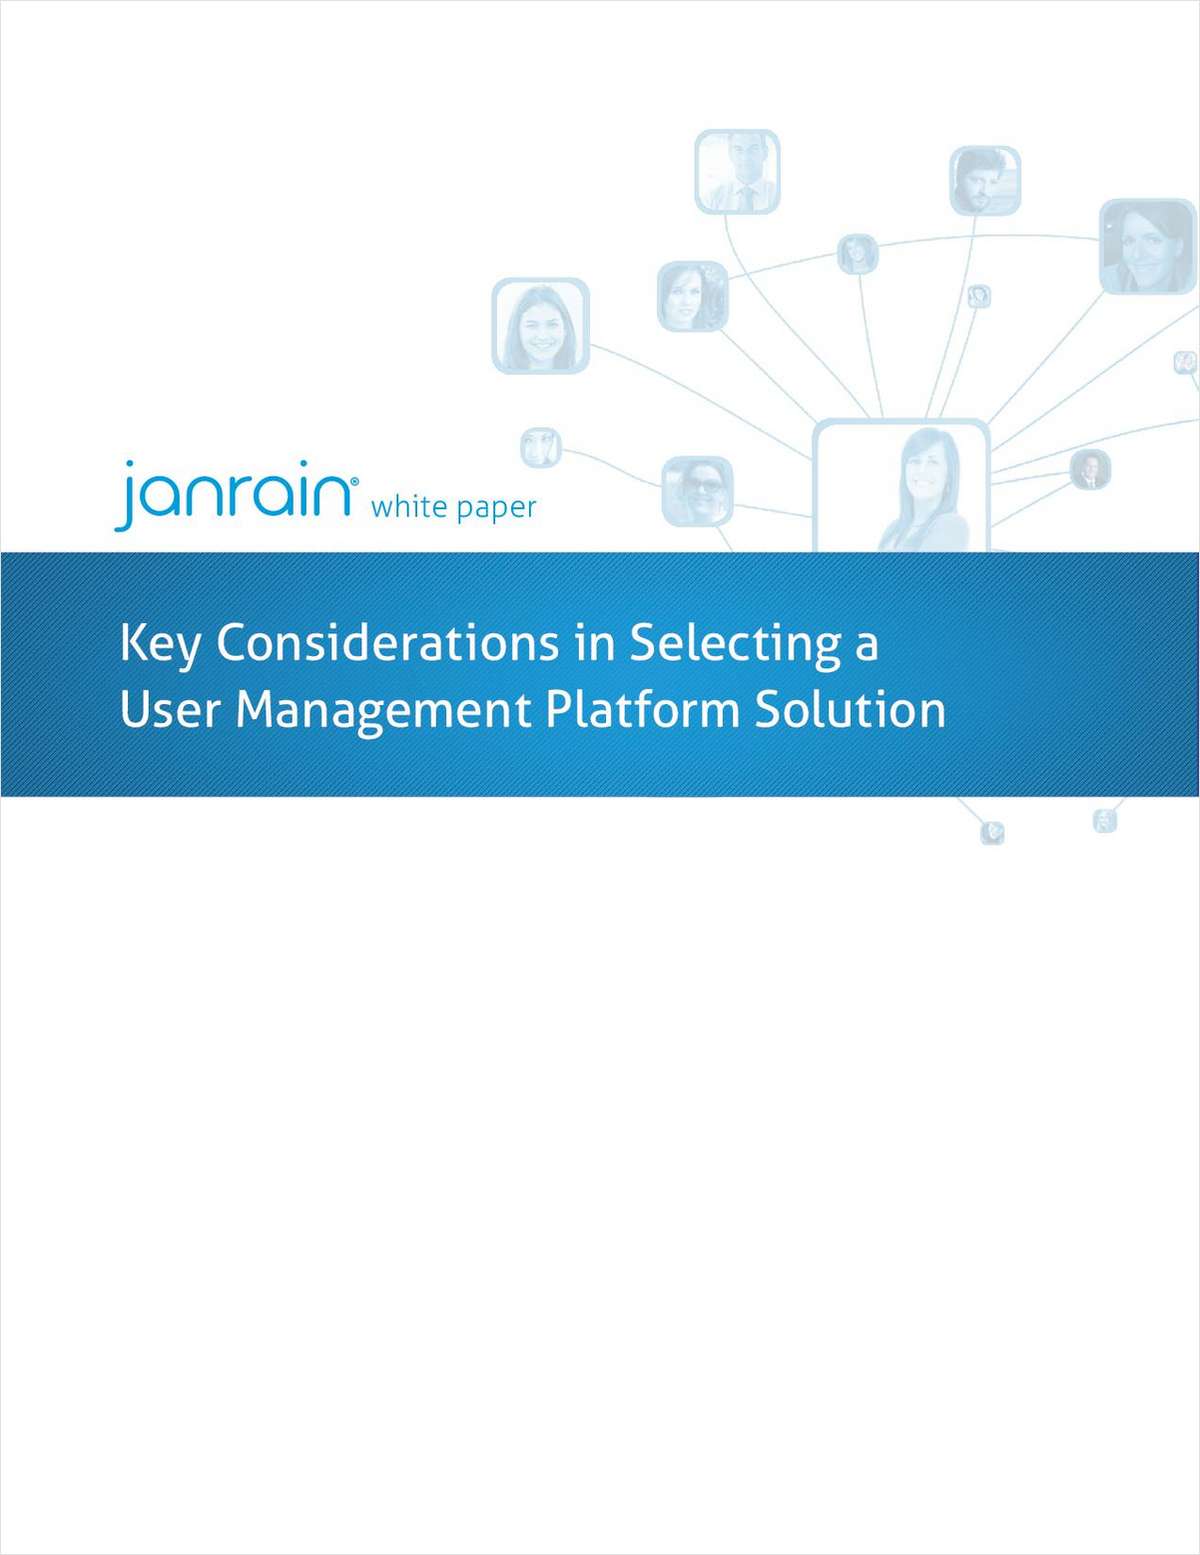 Key Considerations When Selecting a User Management Platform Solution